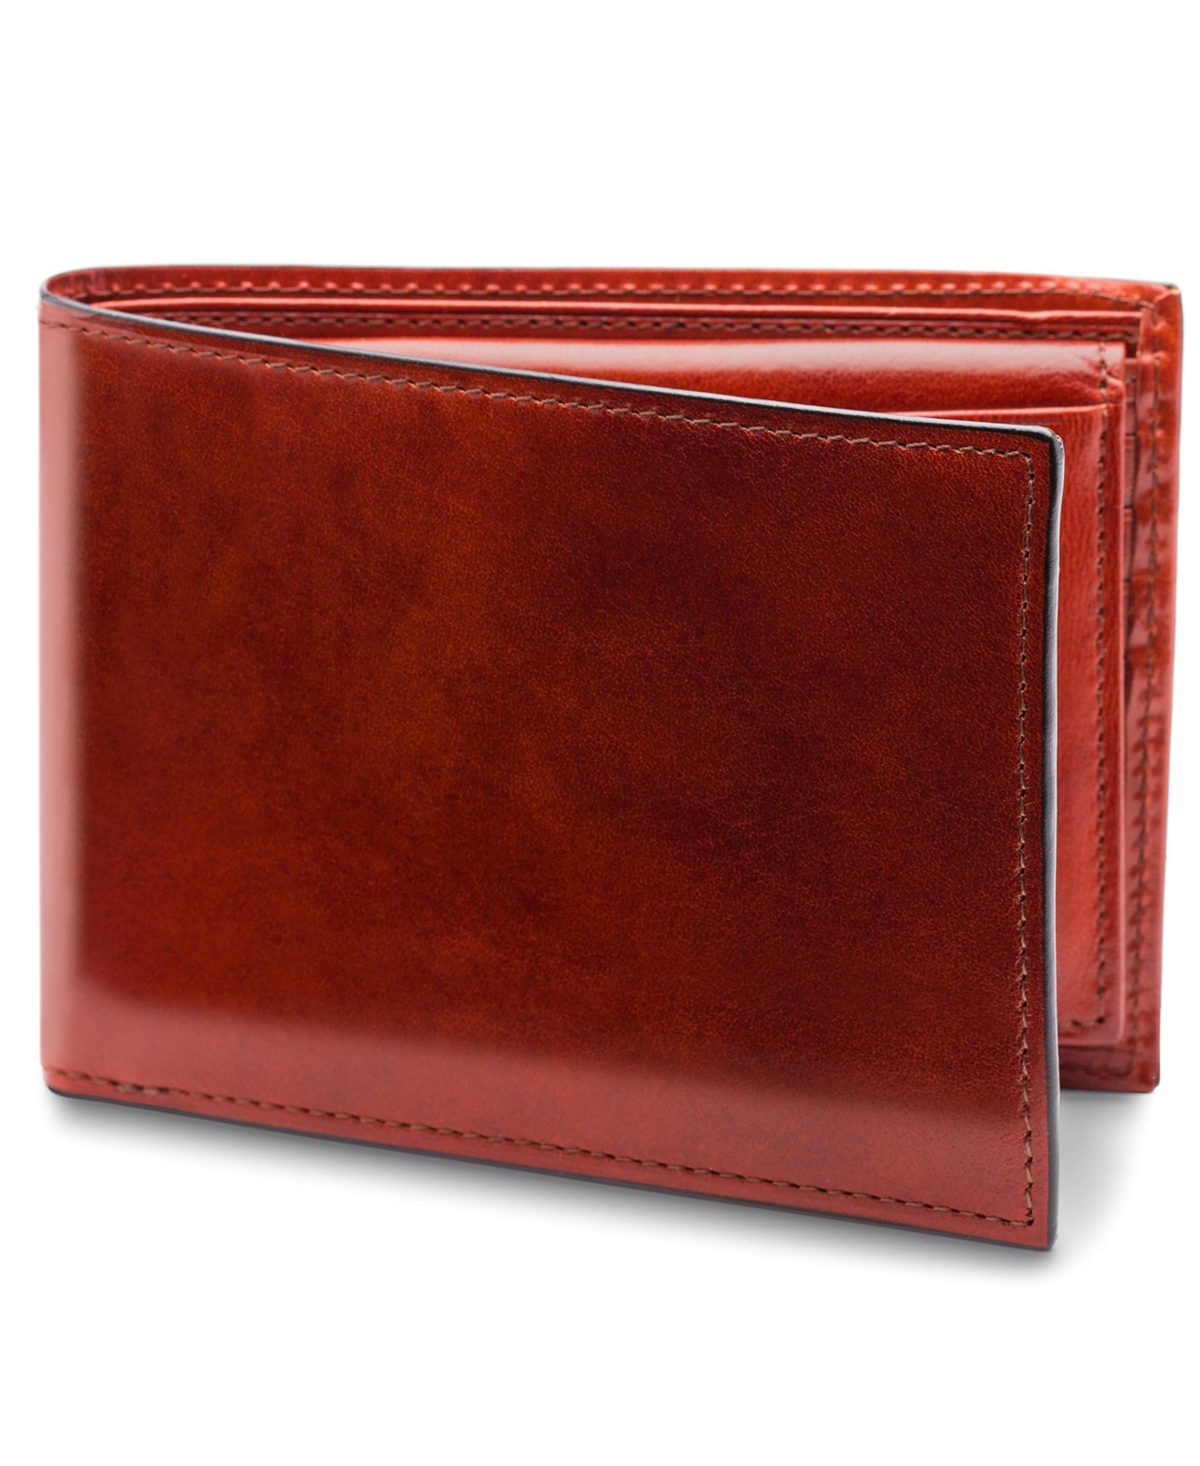 Mens Old Leather Credit Wallet w/Id Passcase - Cognac leather